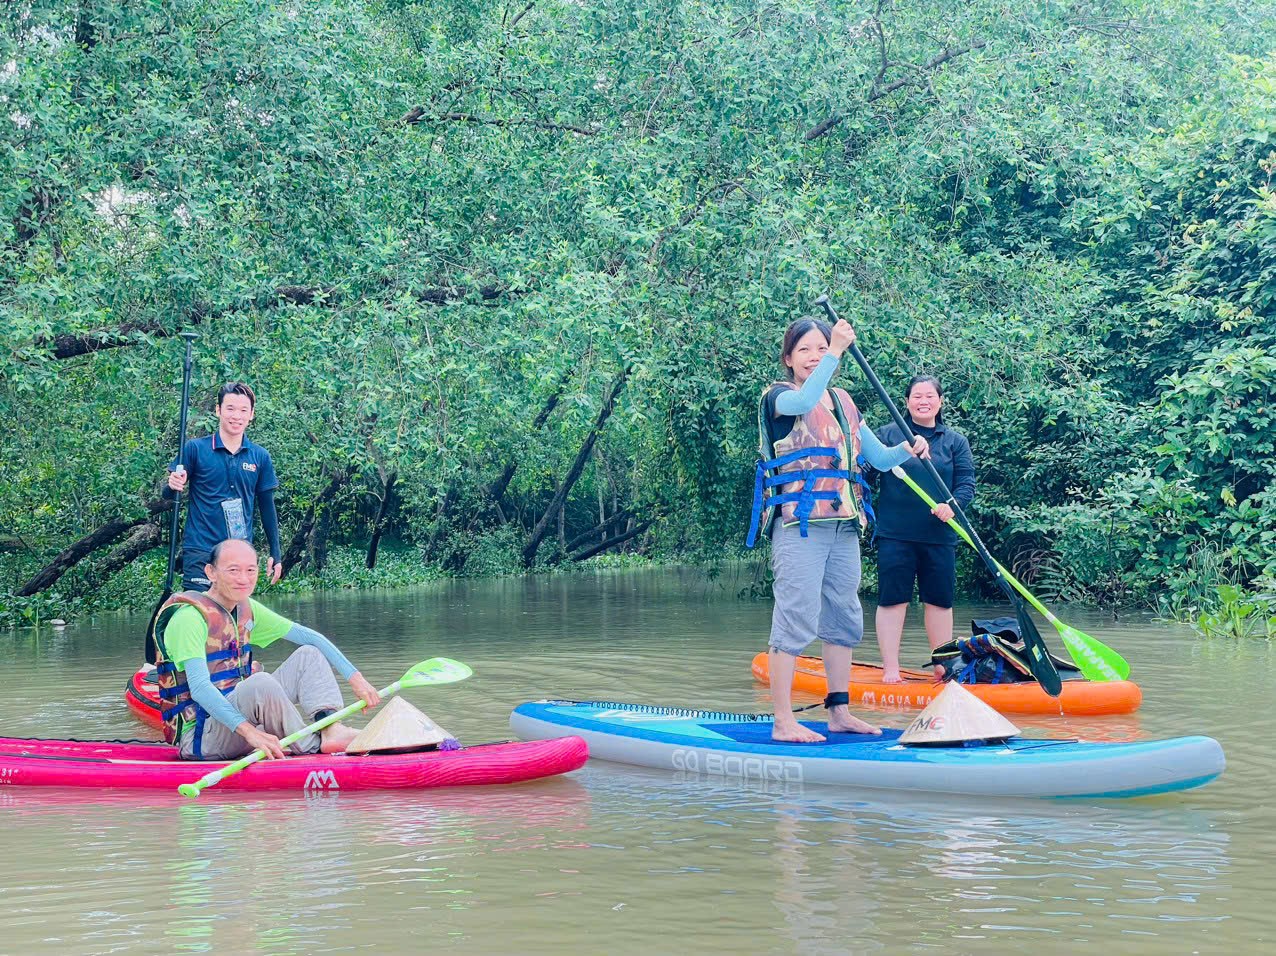 The tourism development sector in the Mekong Delta region currently focuses on agritourism and eco-tourism. Local travel businesses are currently interested in expanding their offering of tourism services. Photo: Kim Anh.